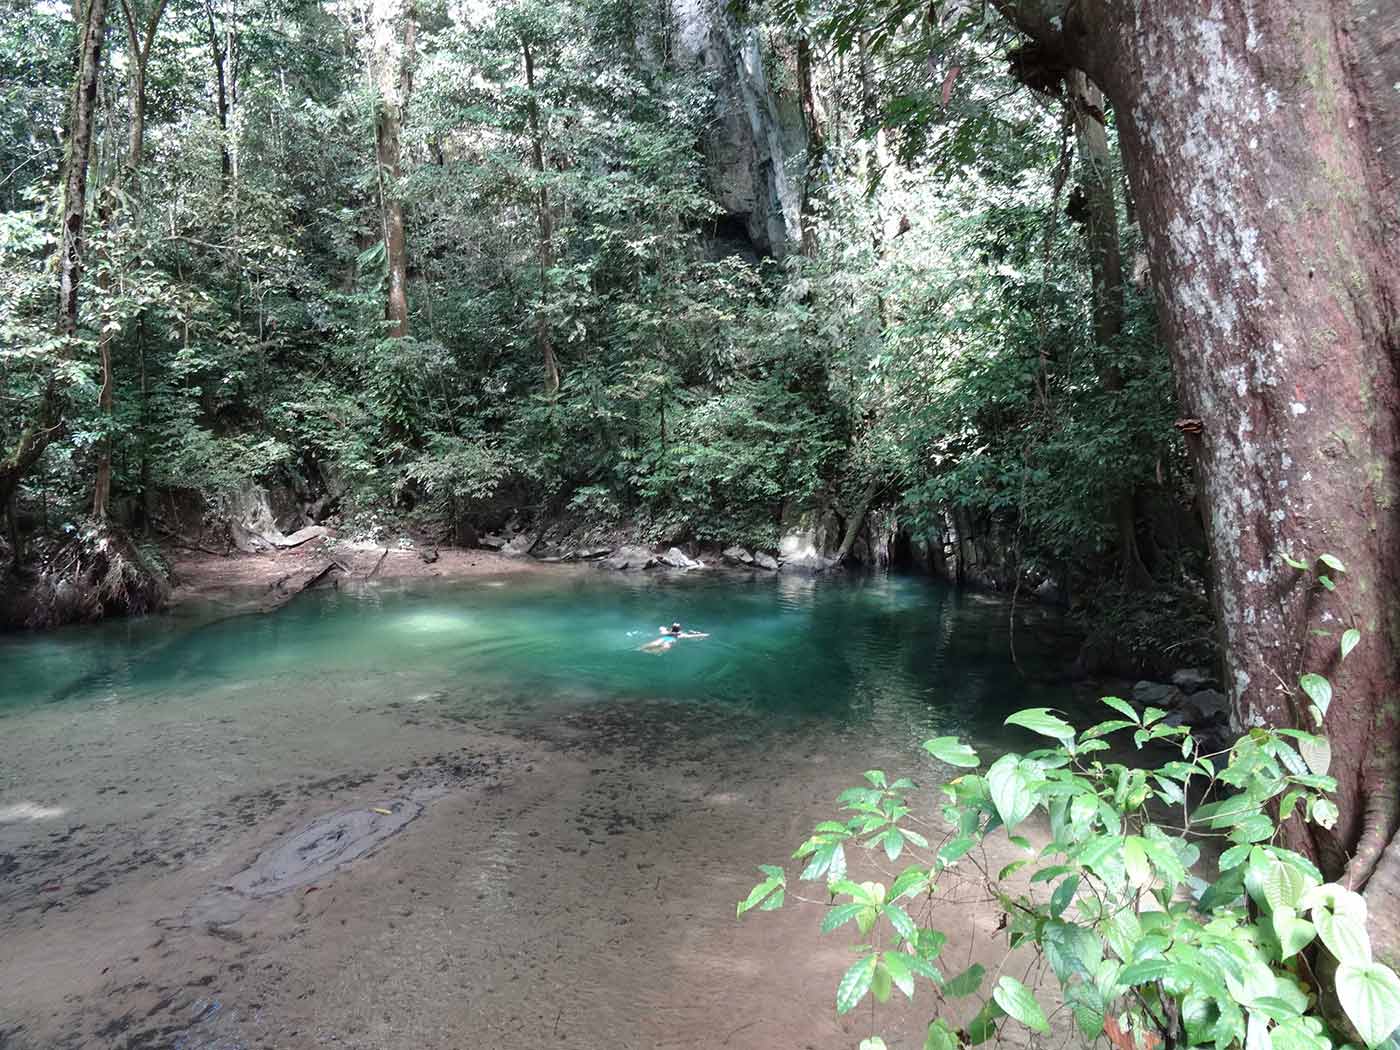 Swimming in the crystal clear waters in Mulu National Park